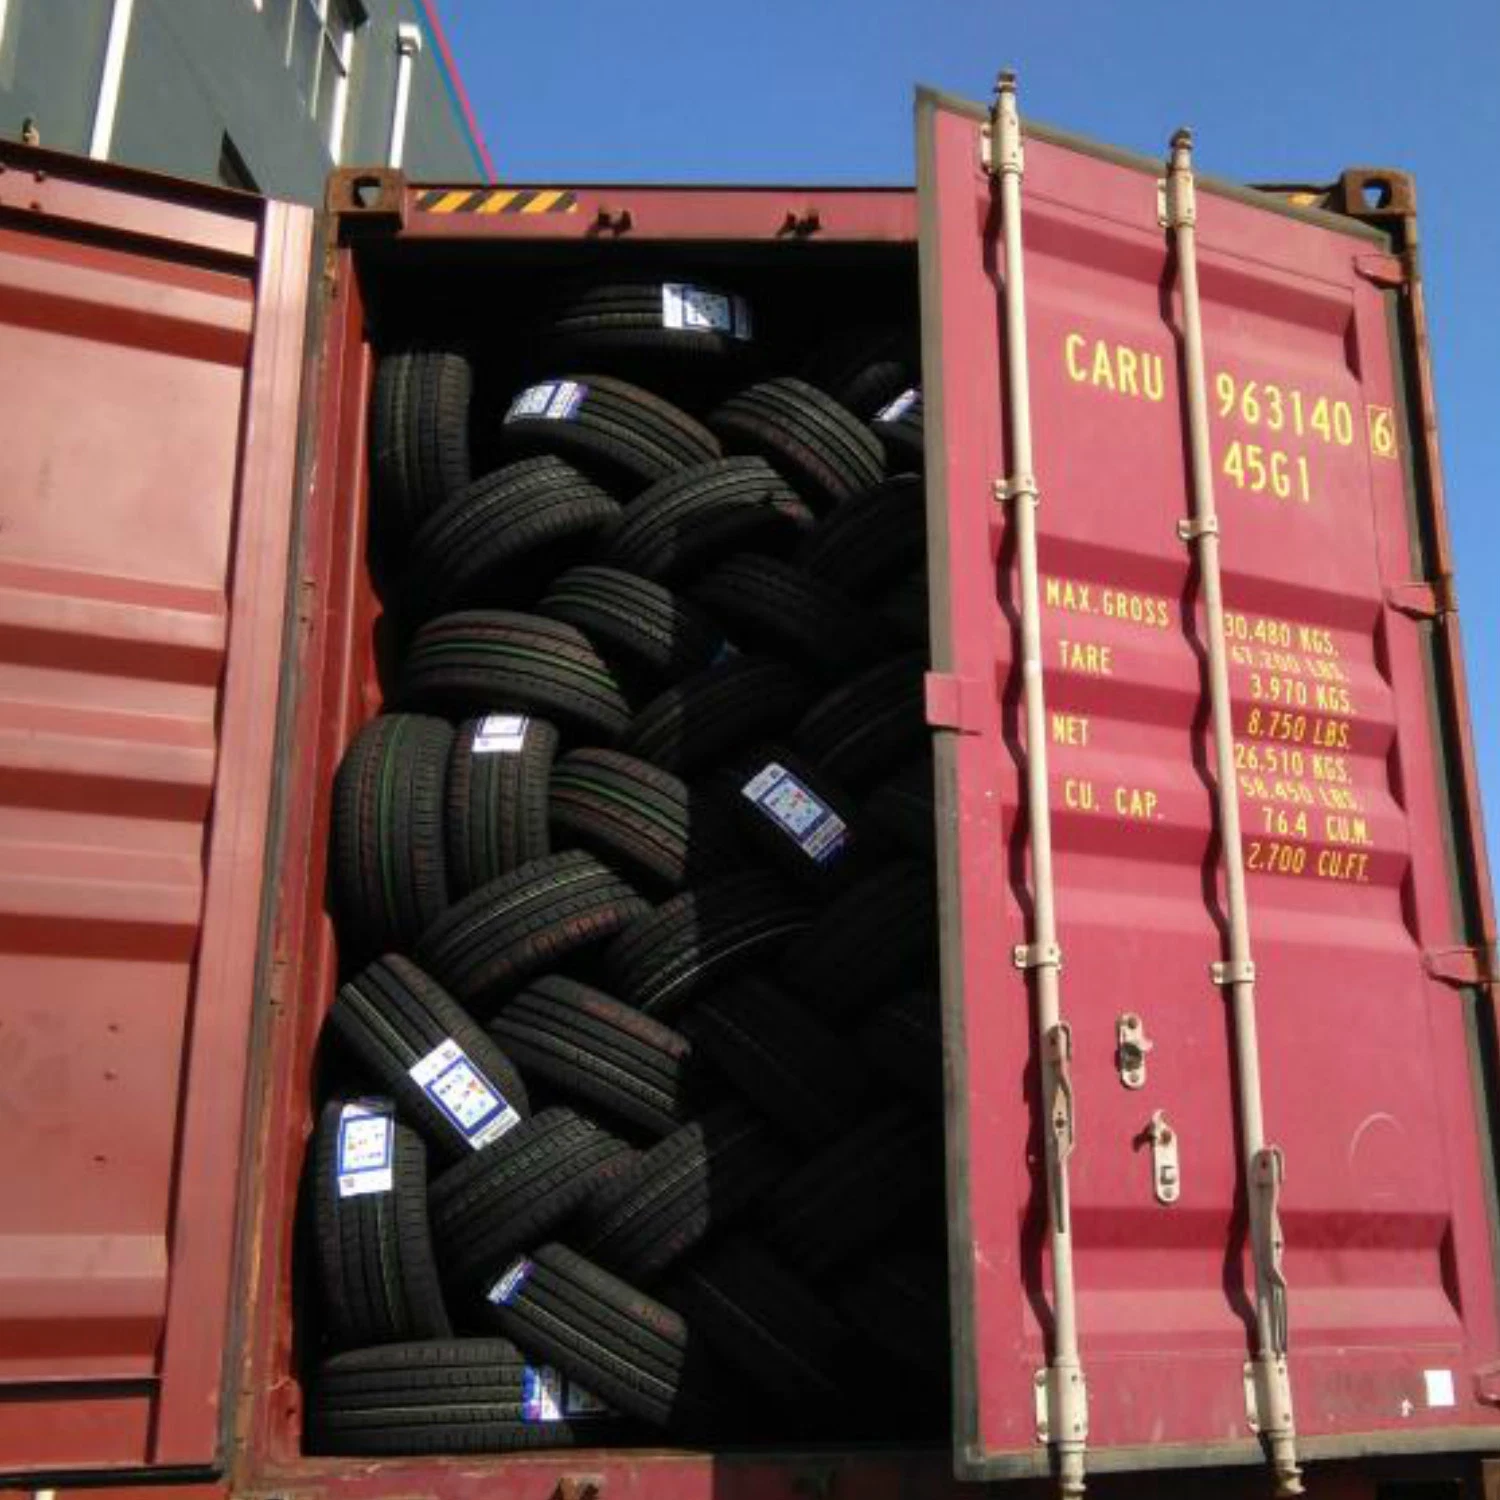 Stable Quality Van Tyre with DOT Certificate